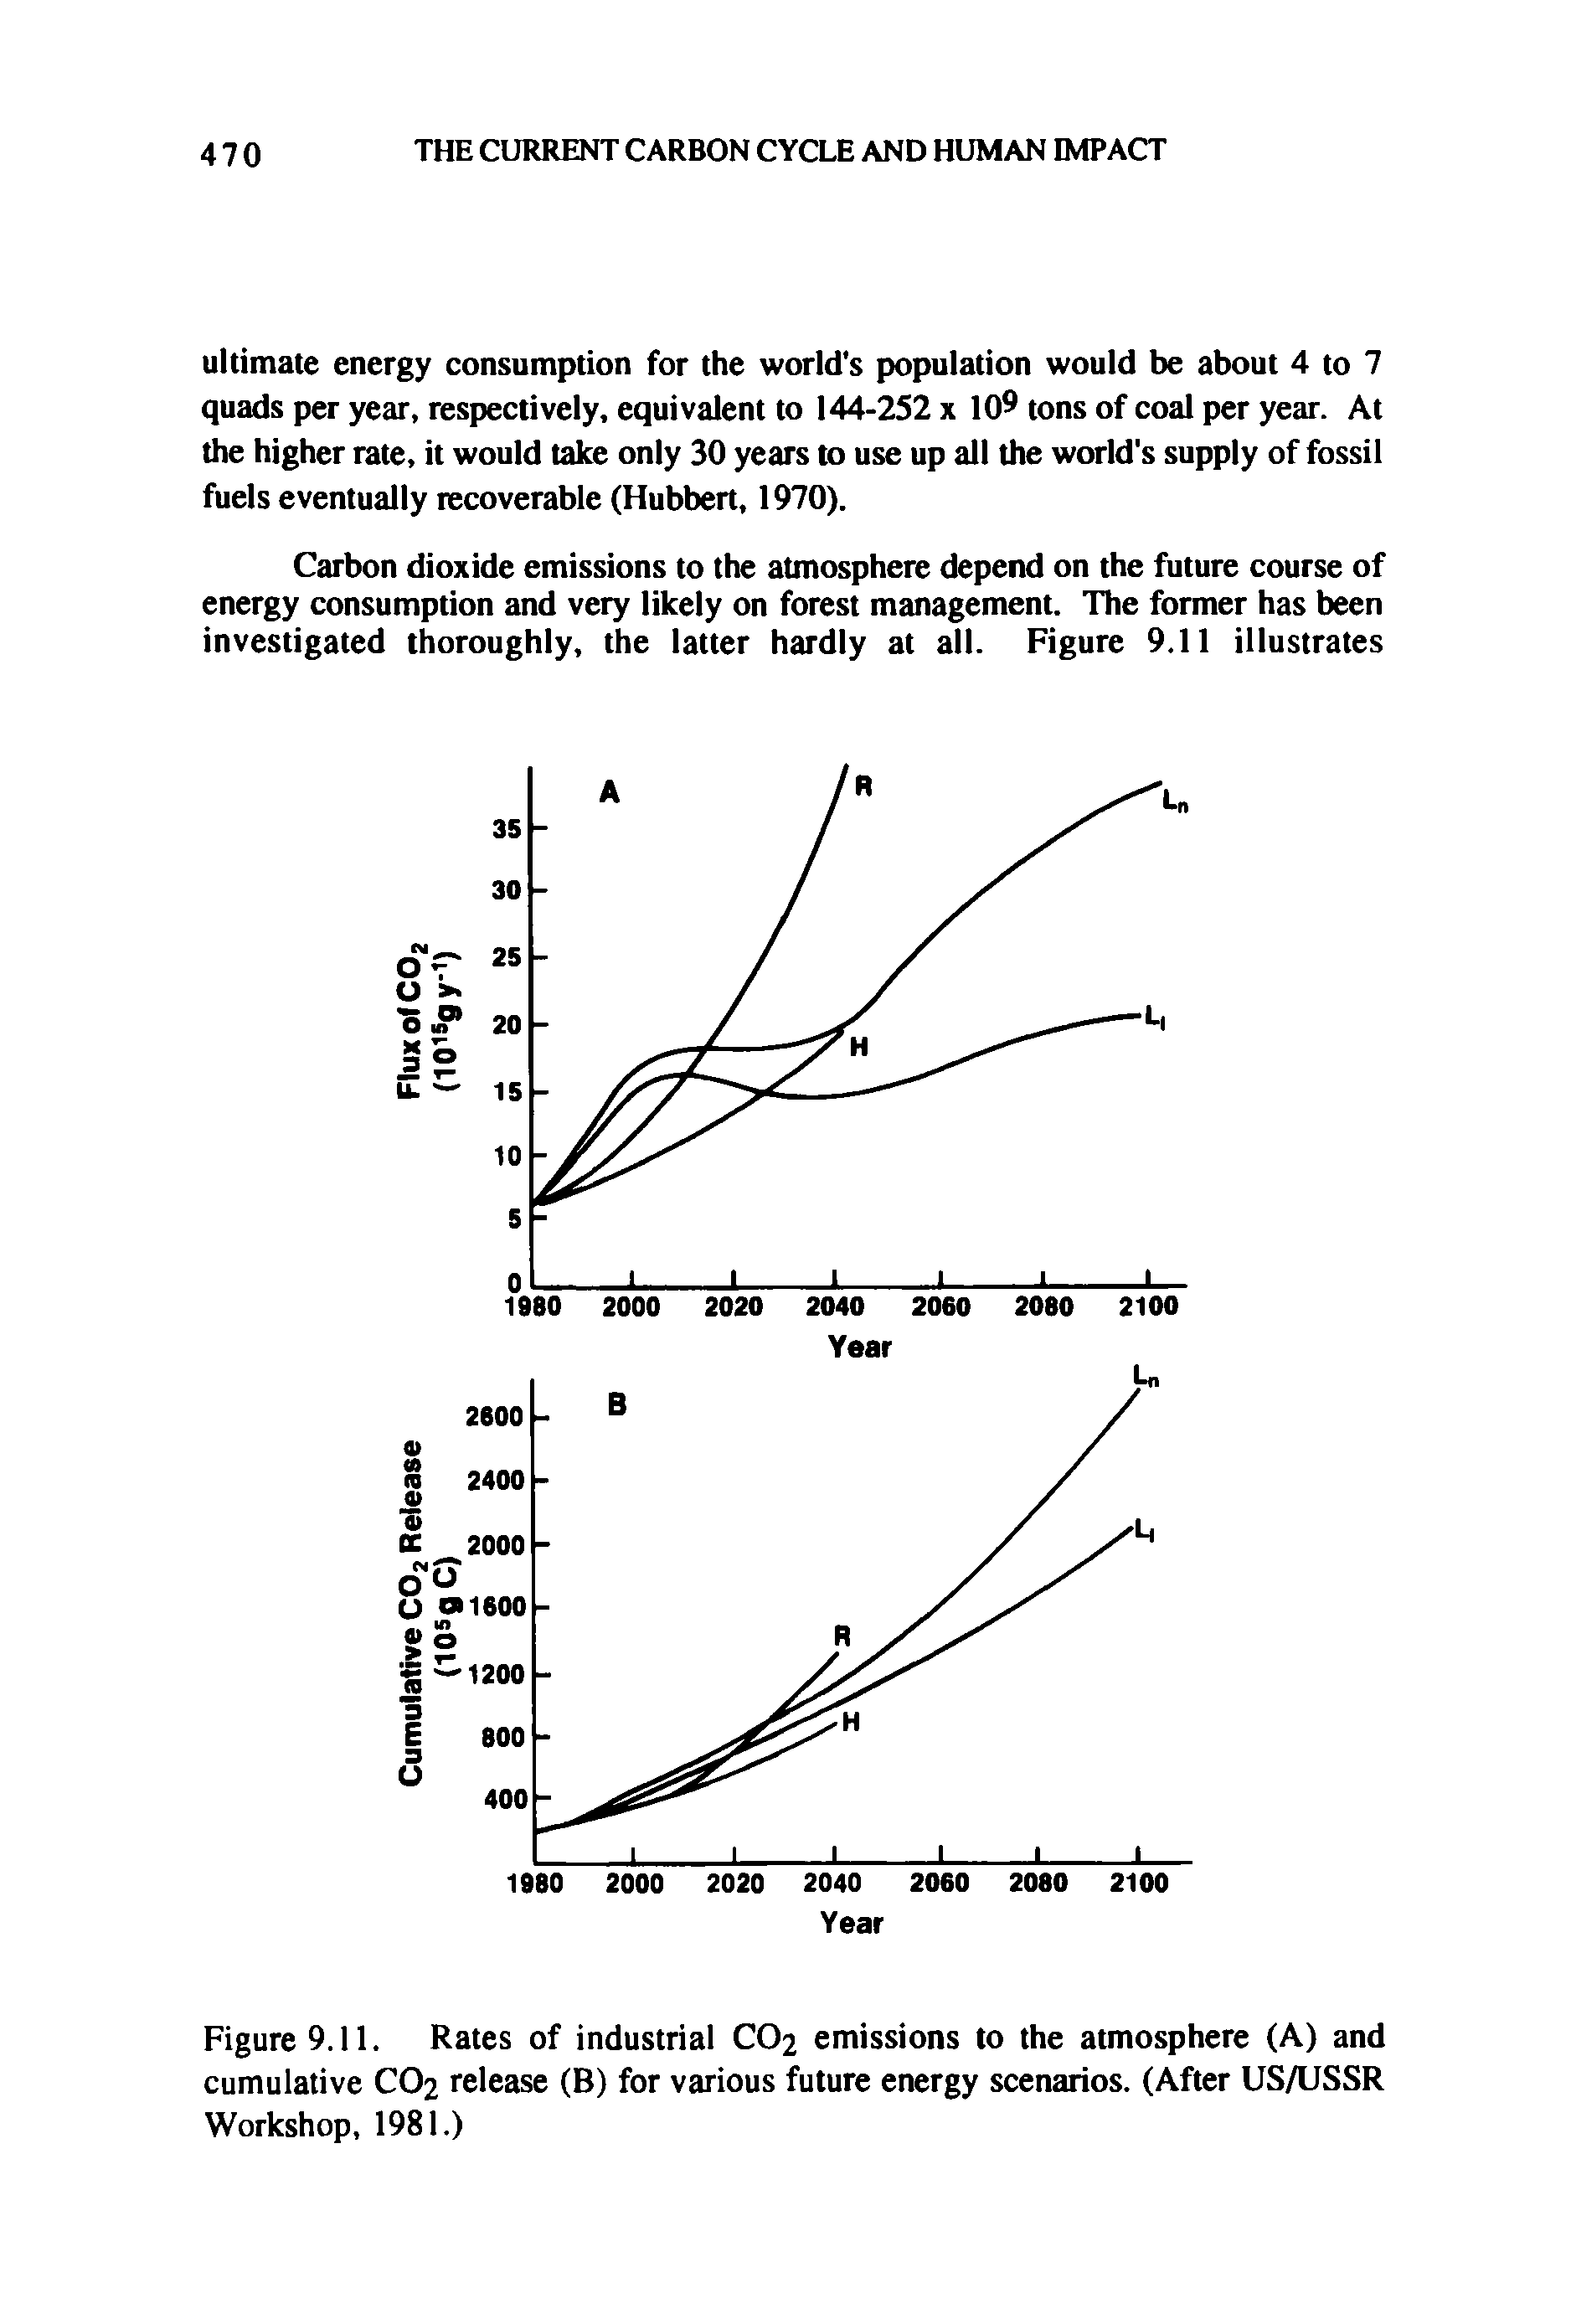 Figure 9.11. Rates of industrial CO2 emissions to the atmosphere (A) and cumulative CO2 release (B) for various future energy scenarios. (After US/USSR Workshop, 1981.)...